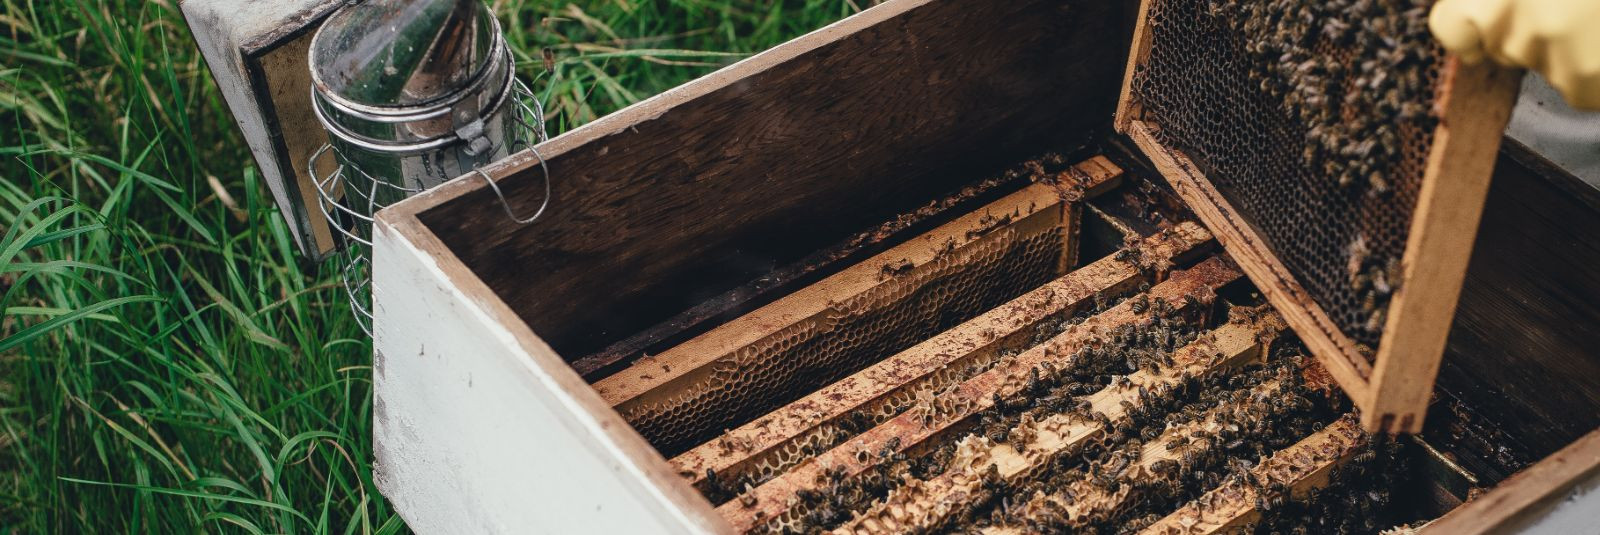 Beekeeping is much more than just filling honey jars. It's a deeply rooted tradition that harmoniously blends nature preservation and healthy lifestyle choices.